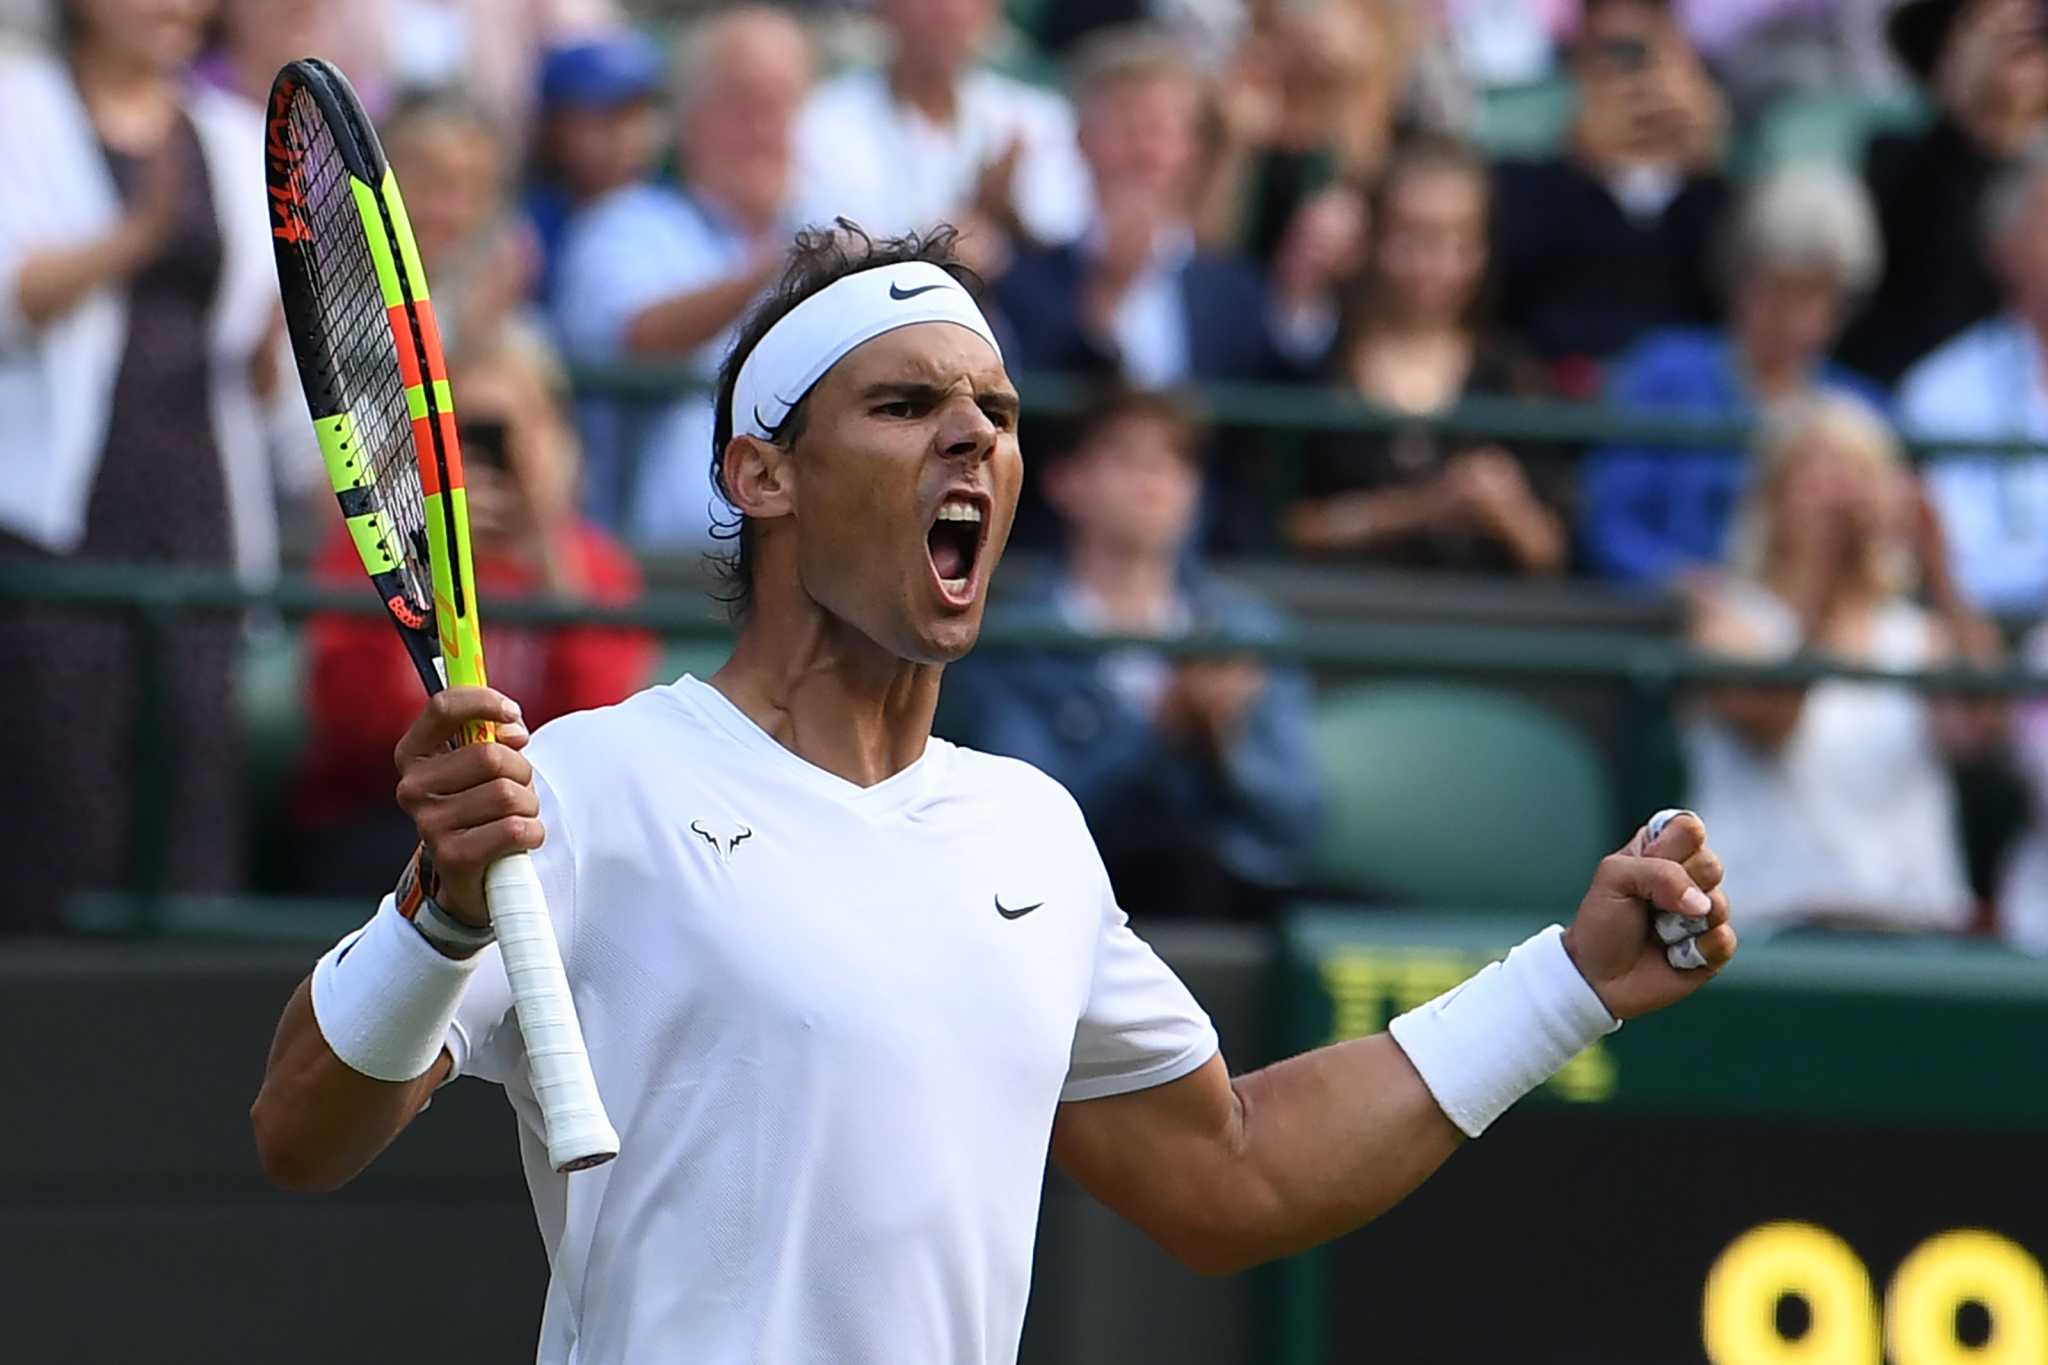 Rafael Nadal sets up rematch with Roger Federer at Wimbledon semifinals - Houston ...2048 x 1365